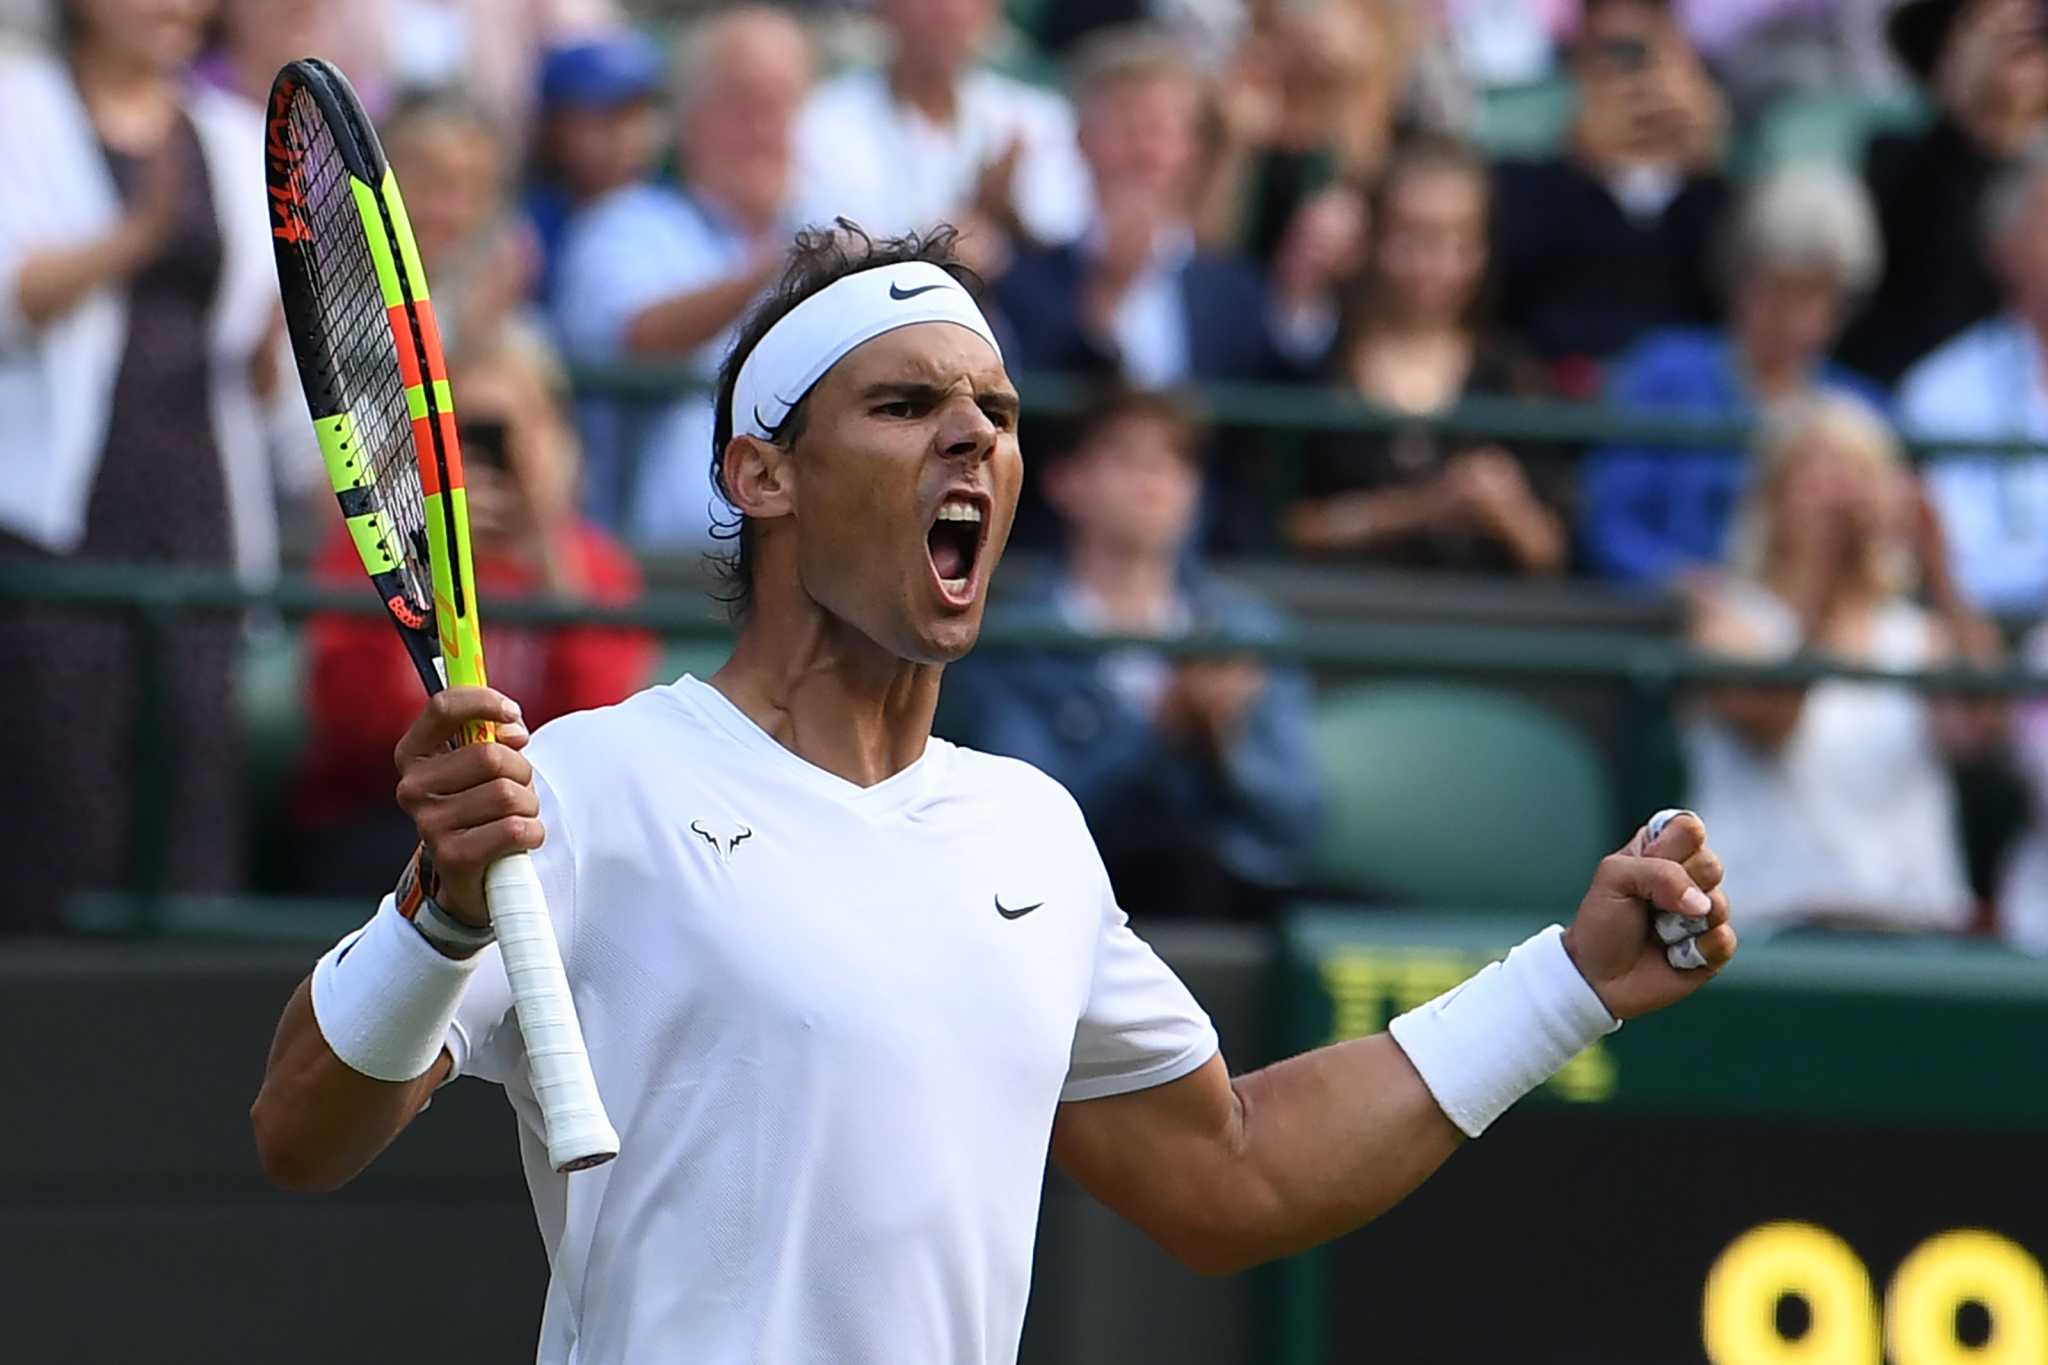 Rafael Nadal sets up rematch with Roger Federer at Wimbledon semifinals - Houston ...2048 x 1365